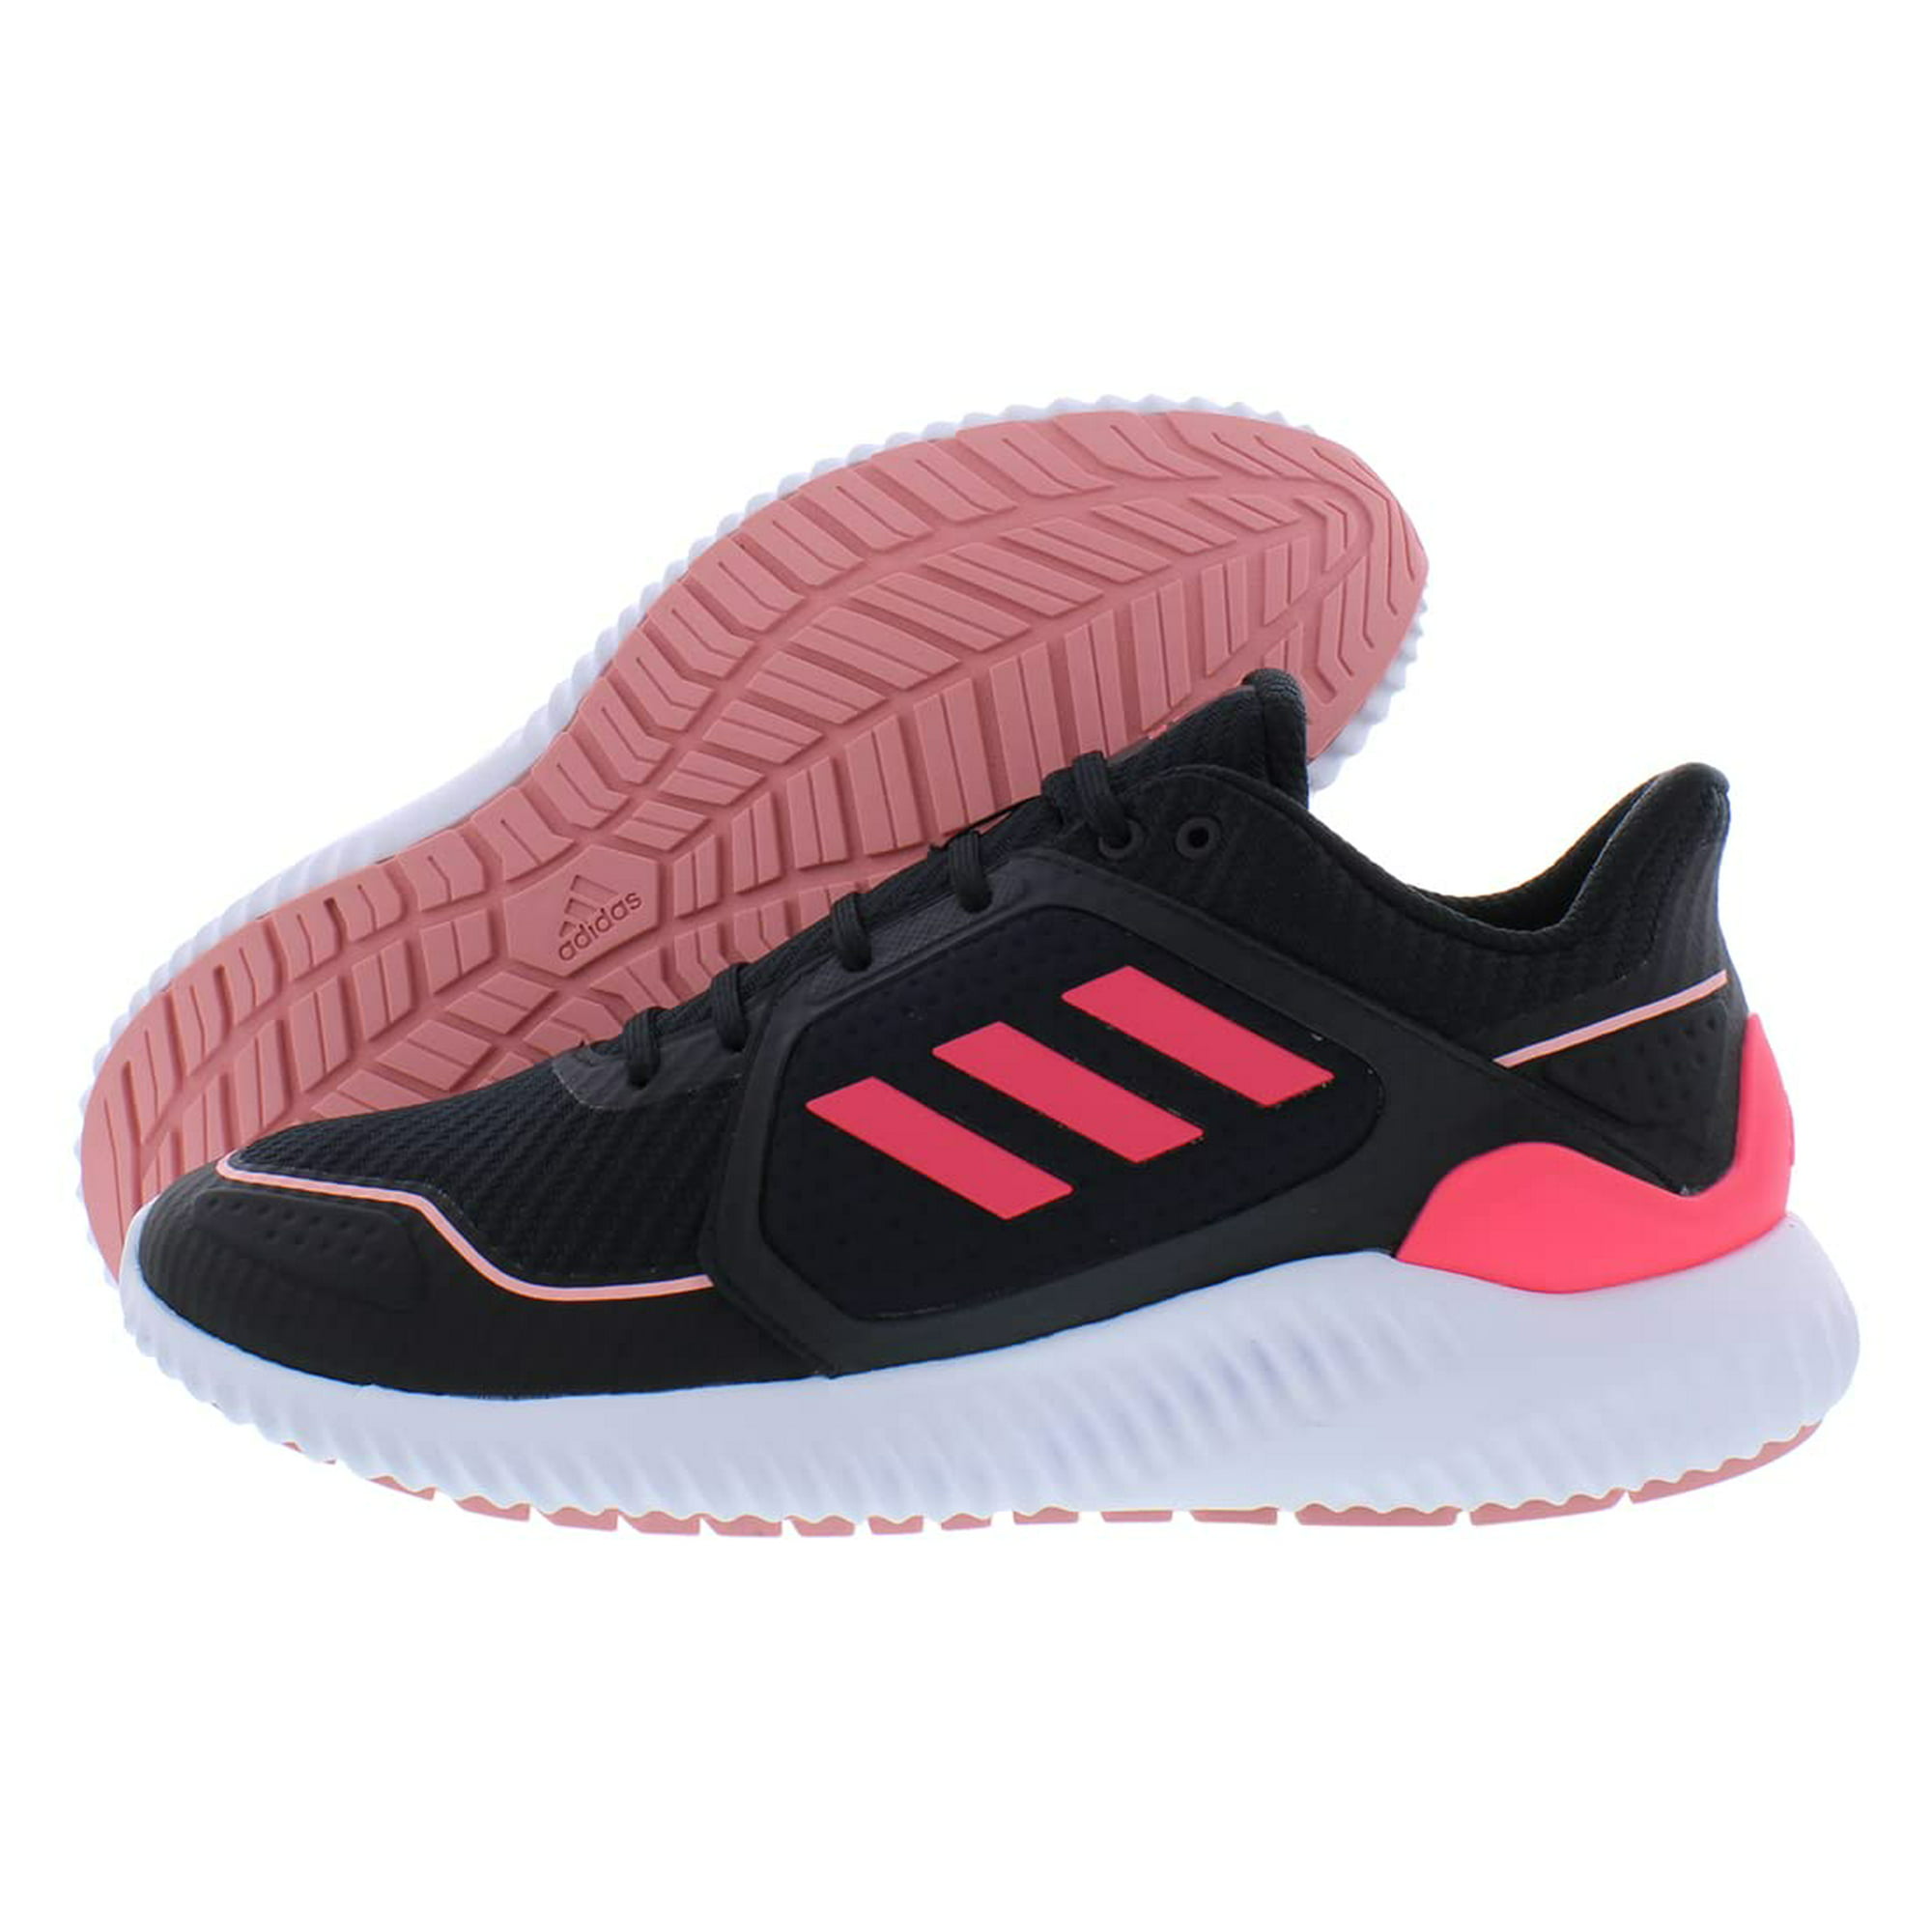 adidas Climawarm Bounce Unisex Size Color: Black/Pink | Walmart Canada